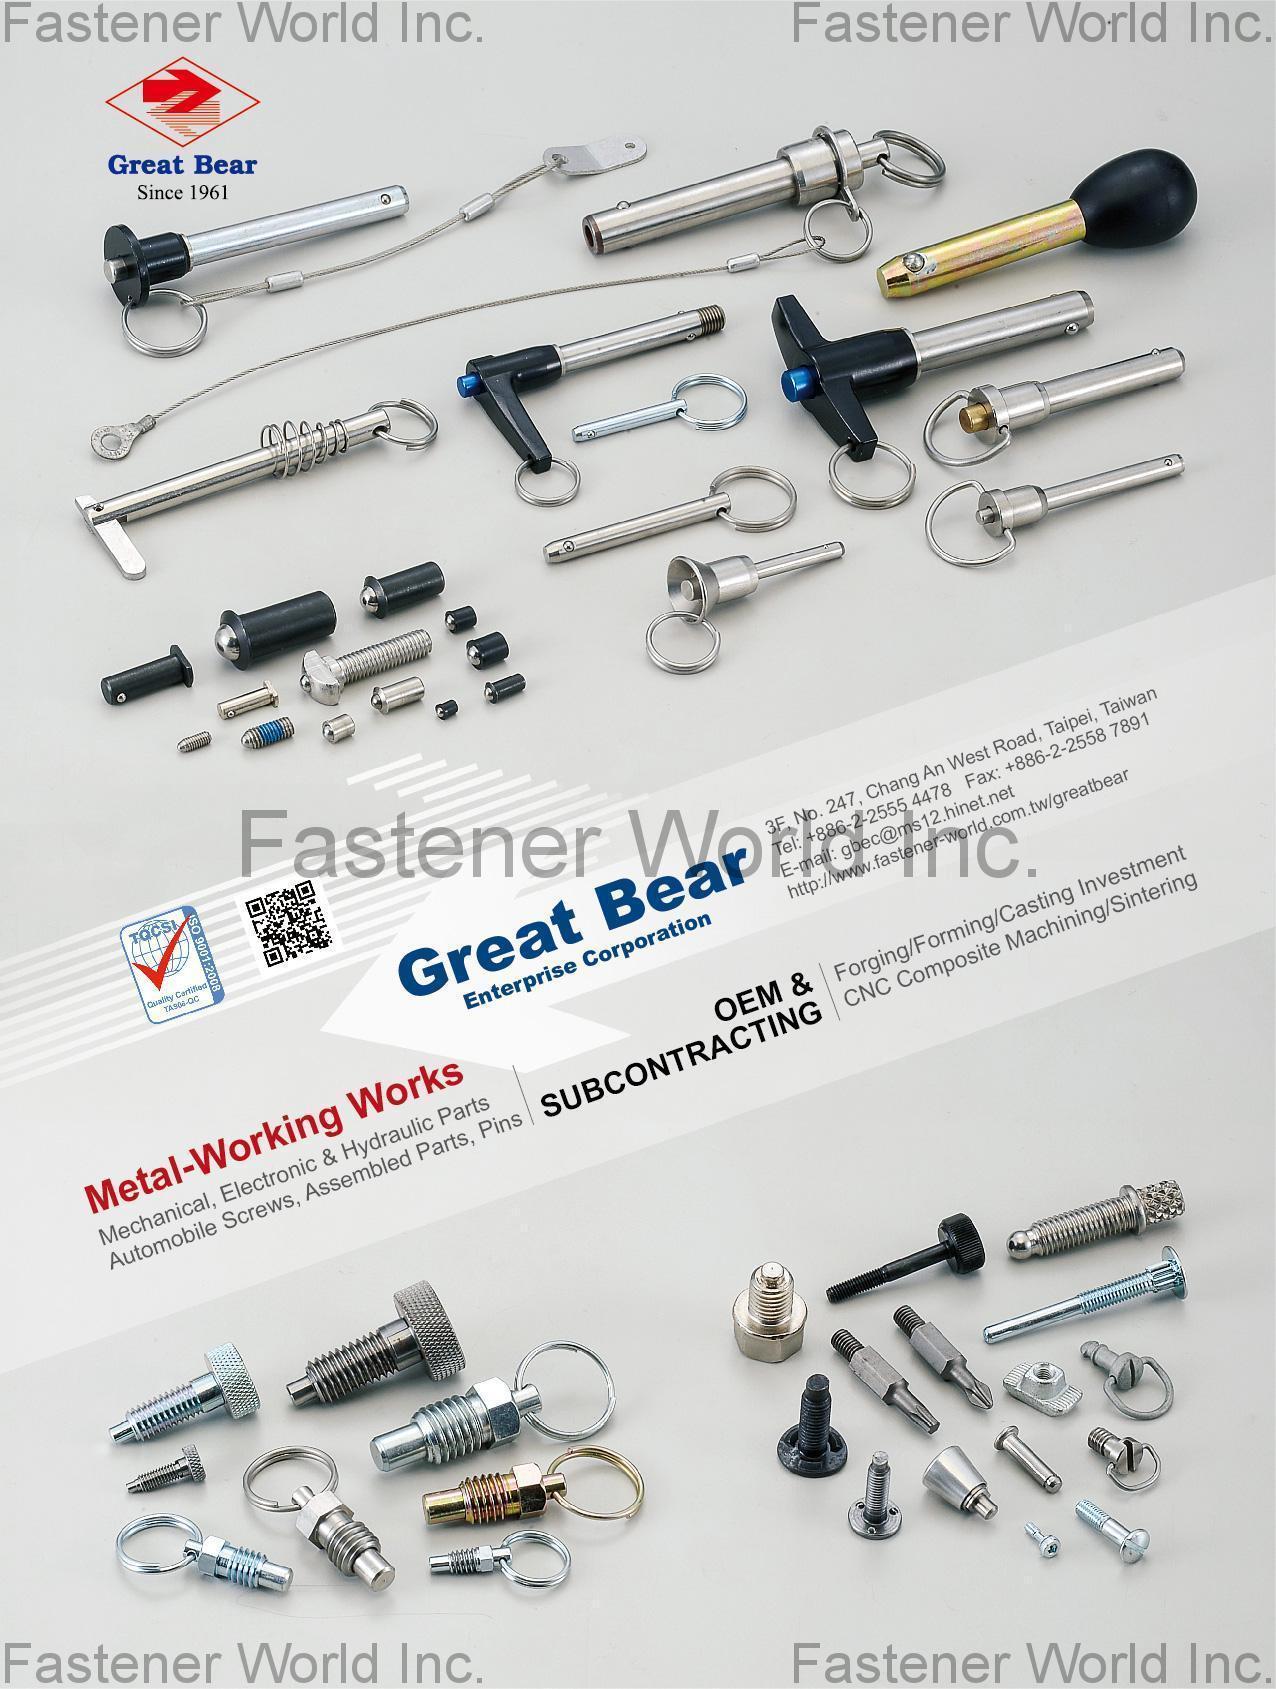 GREAT BEAR ENTERPRISE CORPORATION , Mechanical, Electronic & Hydraulic Parts, Automobile Screws, Assembled Parts, Pins , Pin/ Collar